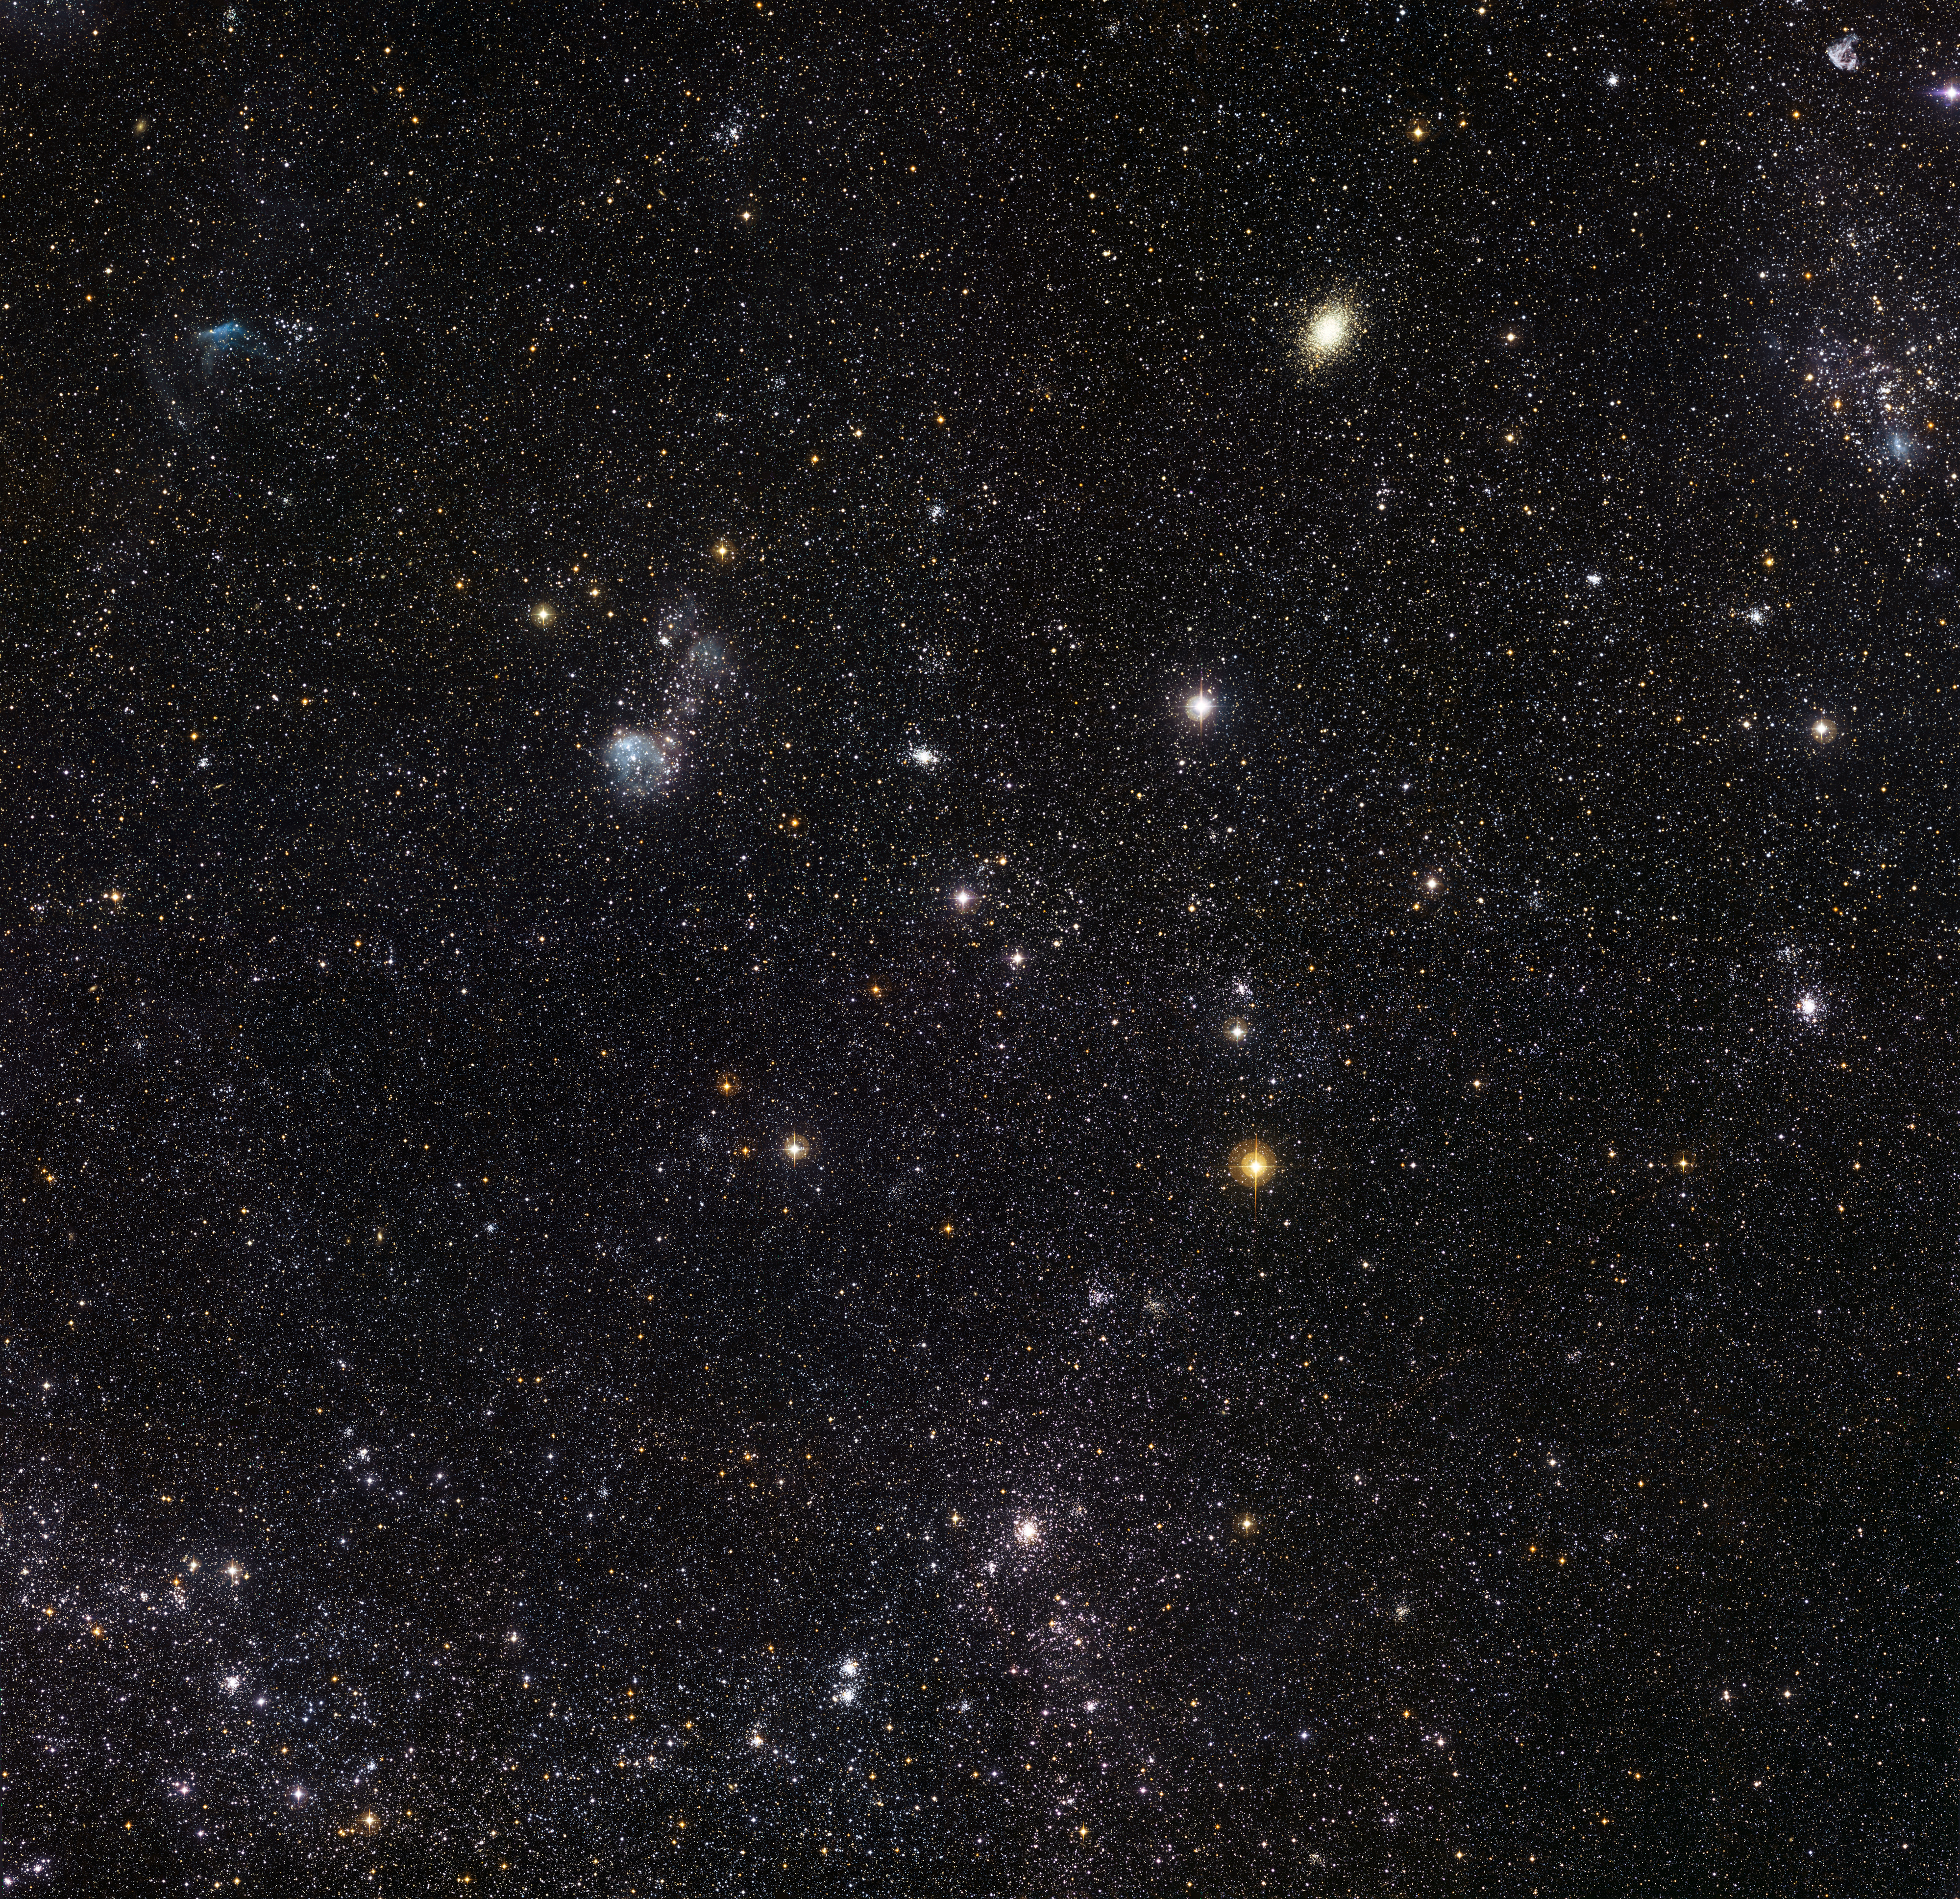 Image from ESO’s La Silla Observatory of part of the Large Magellanic Cloud